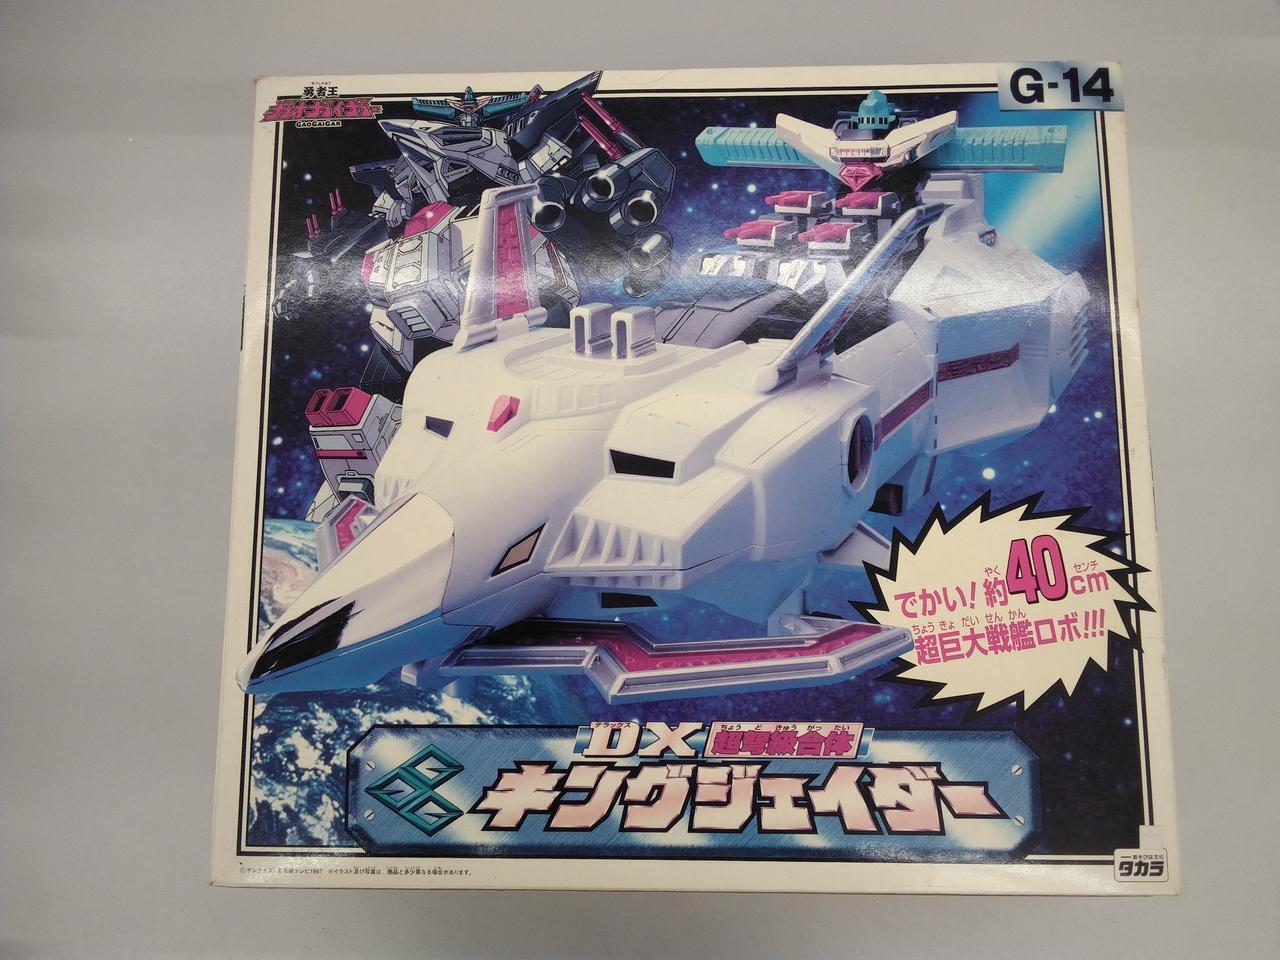 Takara Dx Super Dreadnought Combined King Jader Of Braves Gaogaigar Toy Japan